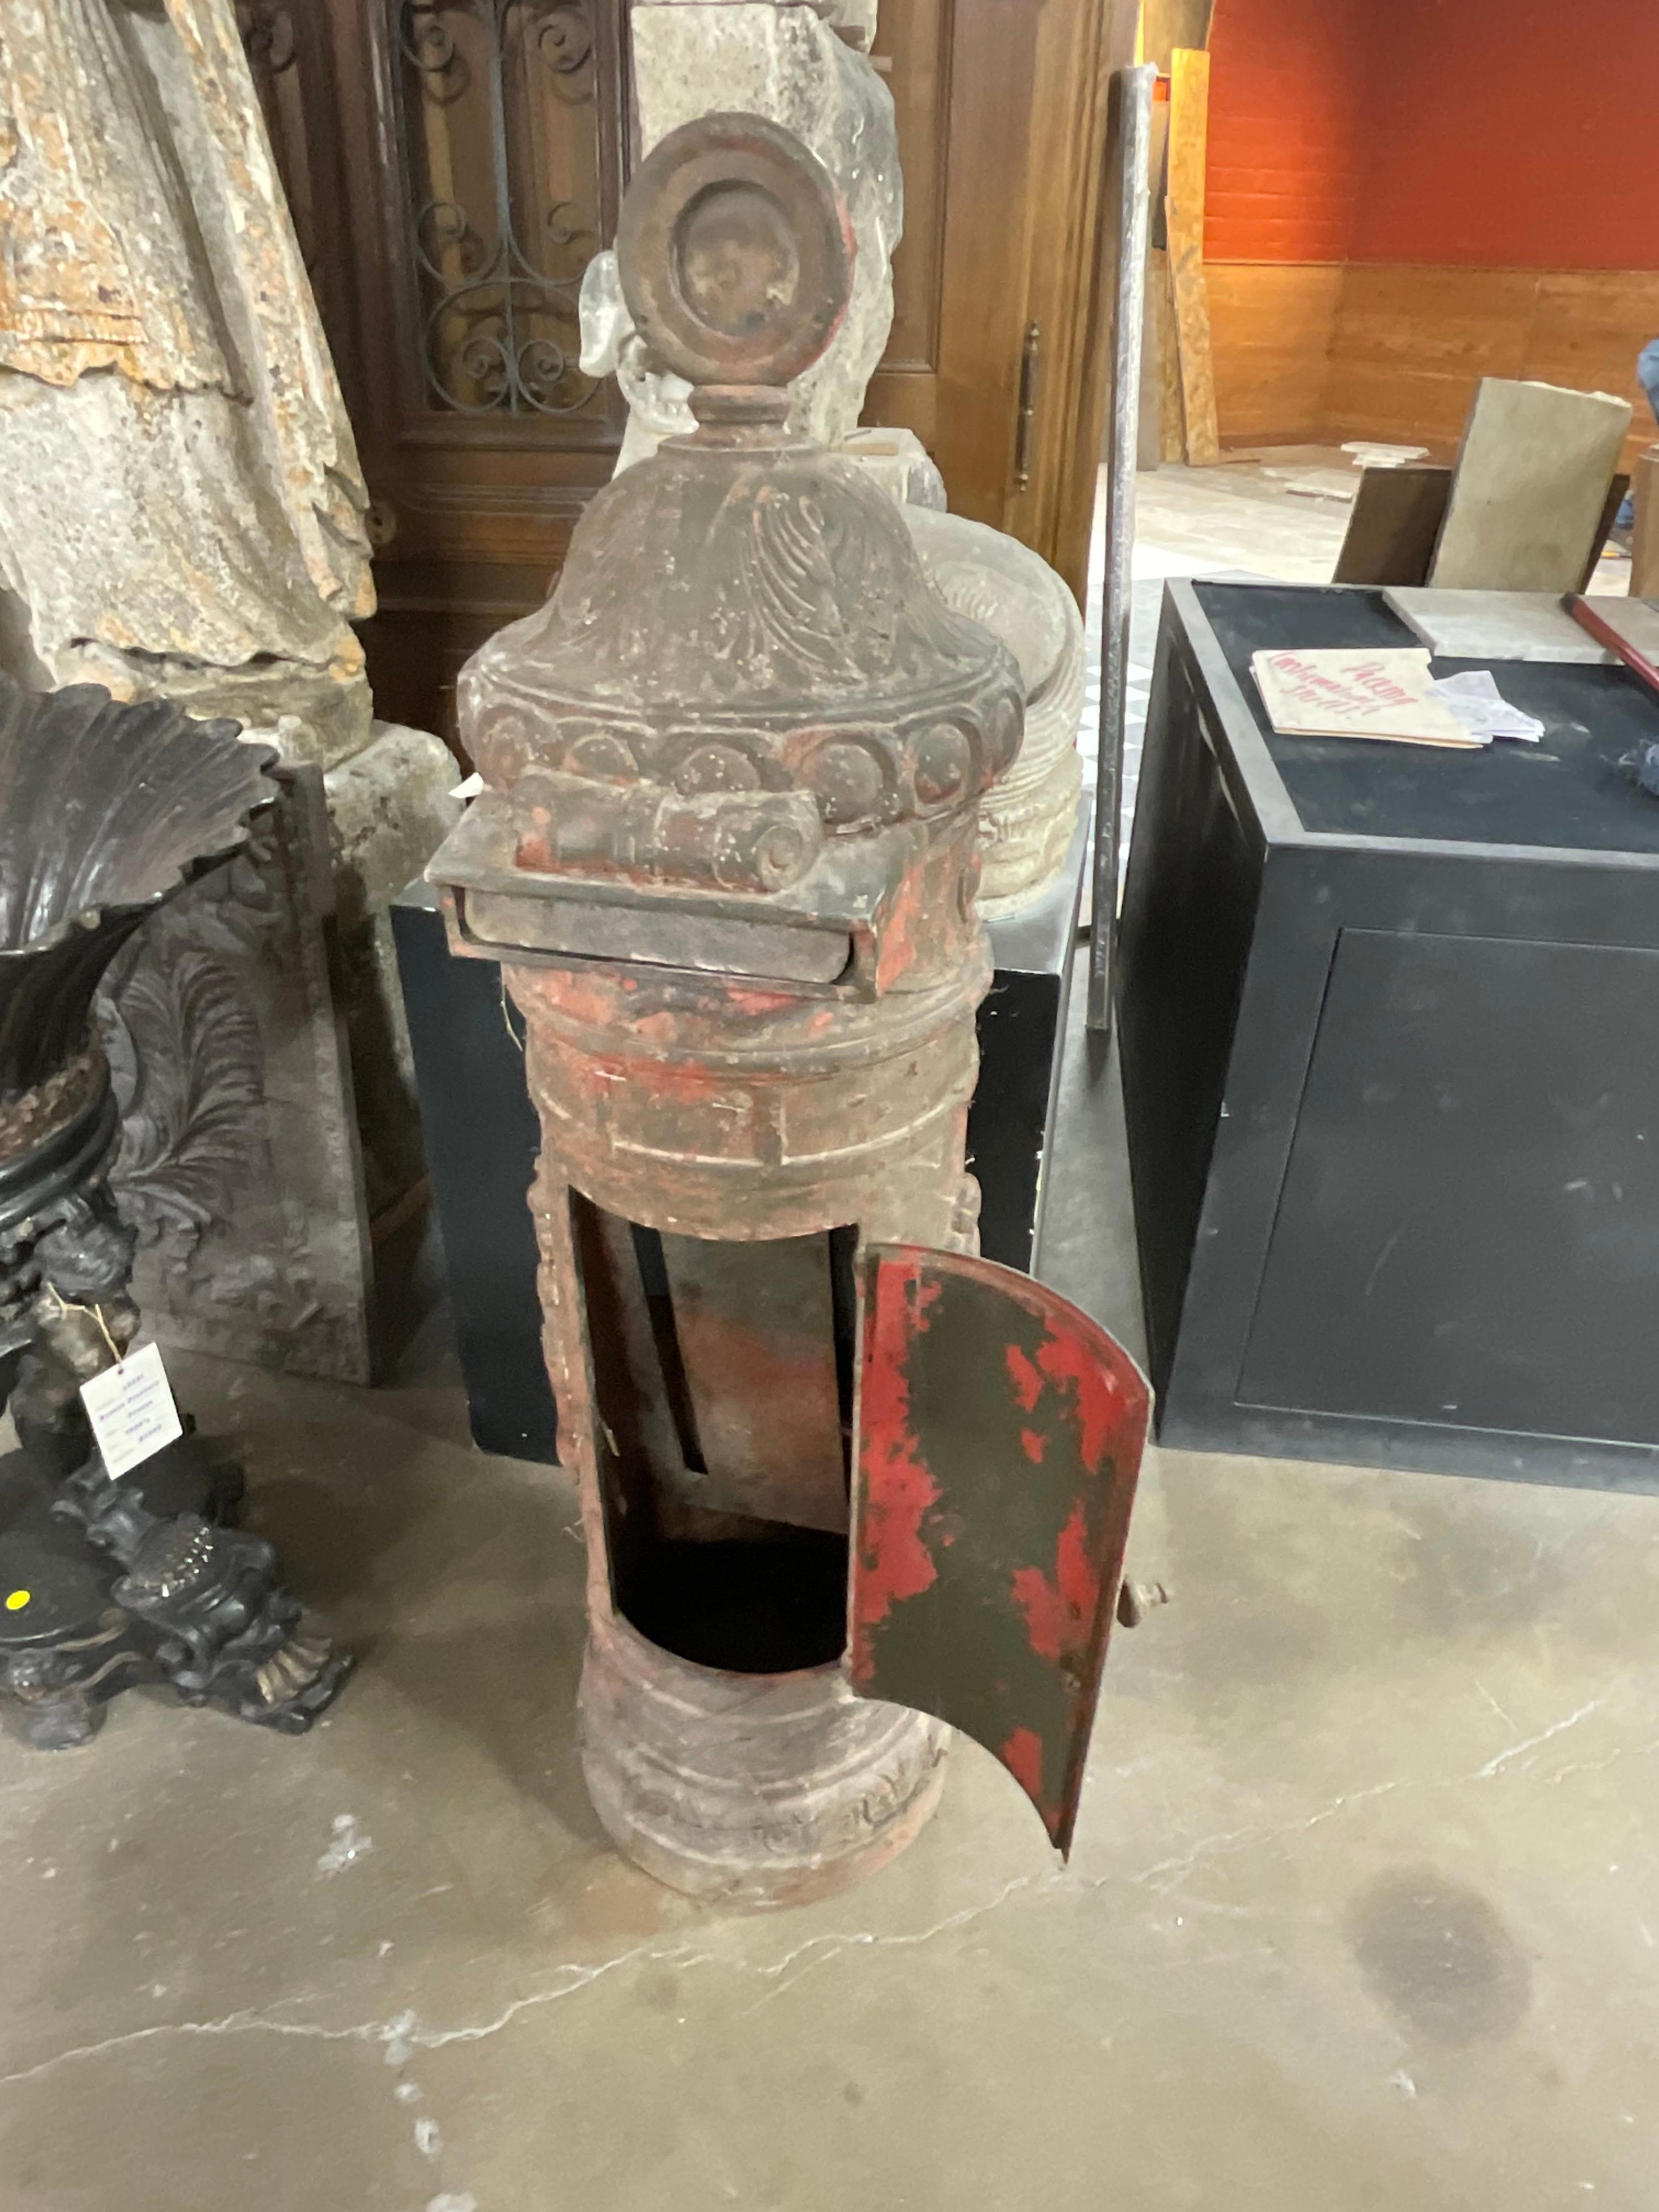 Impressive antique iron mailbox from late 19th century France.